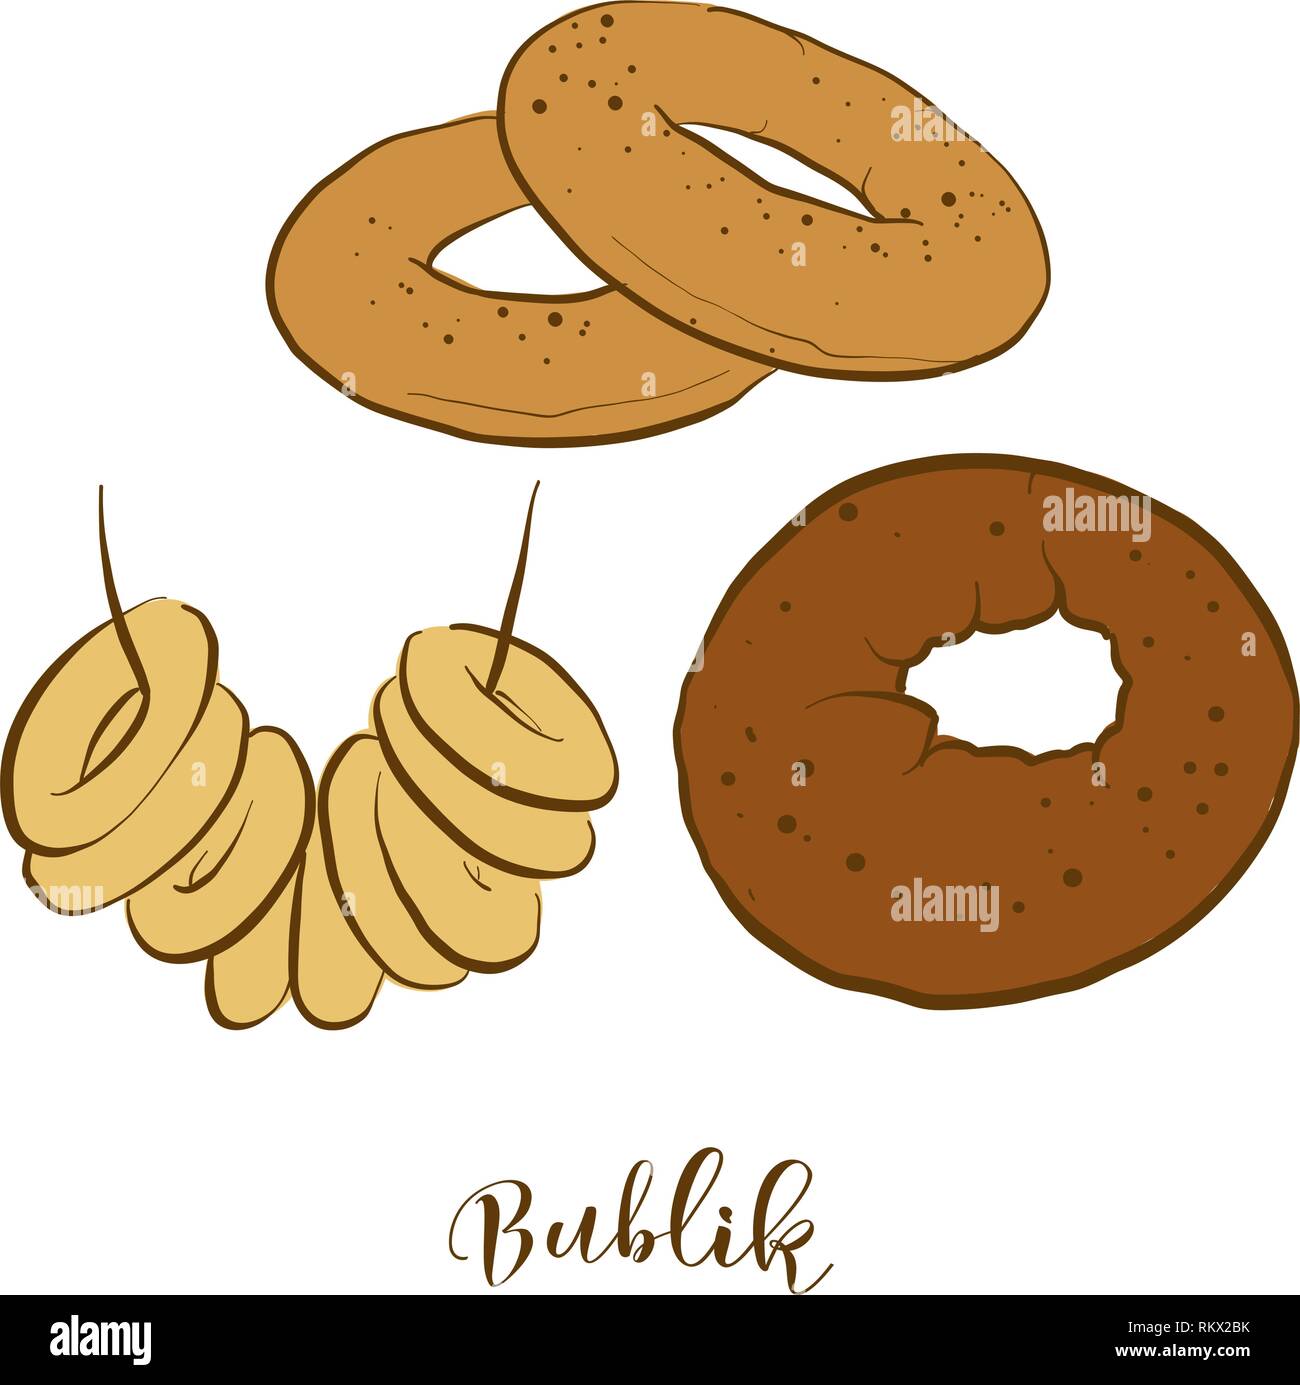 Colored sketches of Bublik bread. Vector drawing of Wheat bread food, usually known in Poland. Colored Bread illustration series. Stock Vector